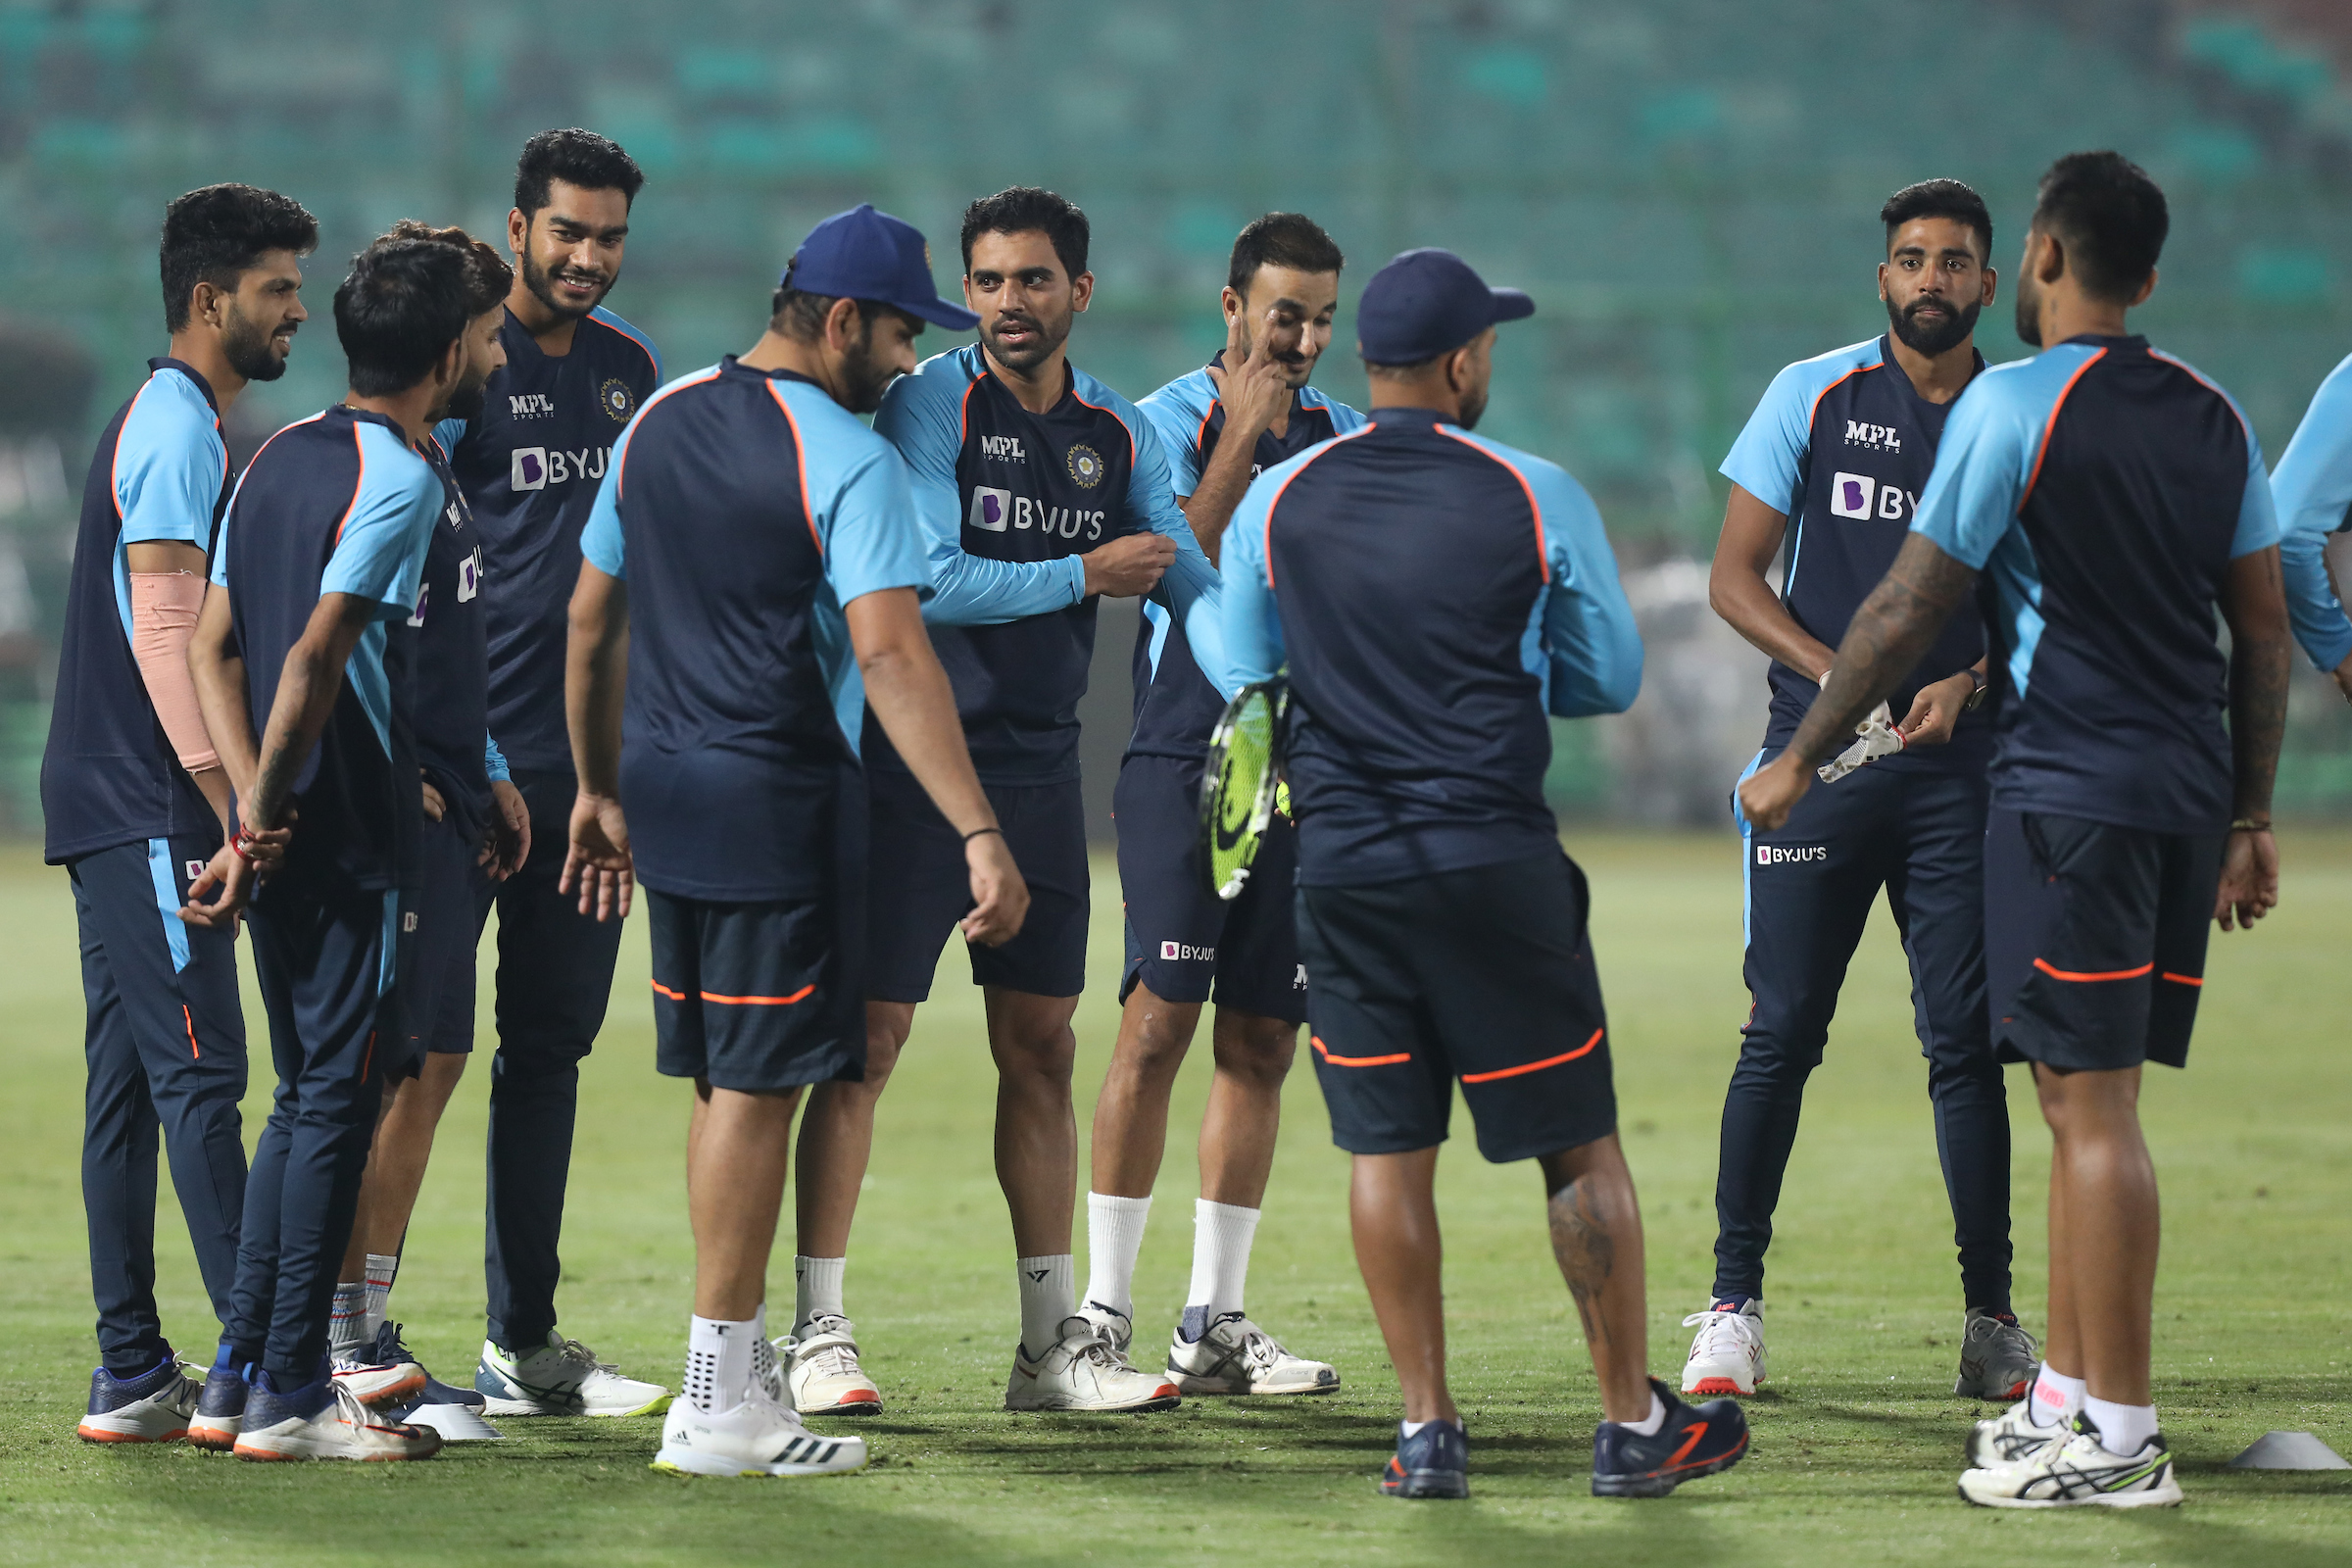 Indian players in Jaipur ahead of 1st T20I vs NZ | BCCI Twitter